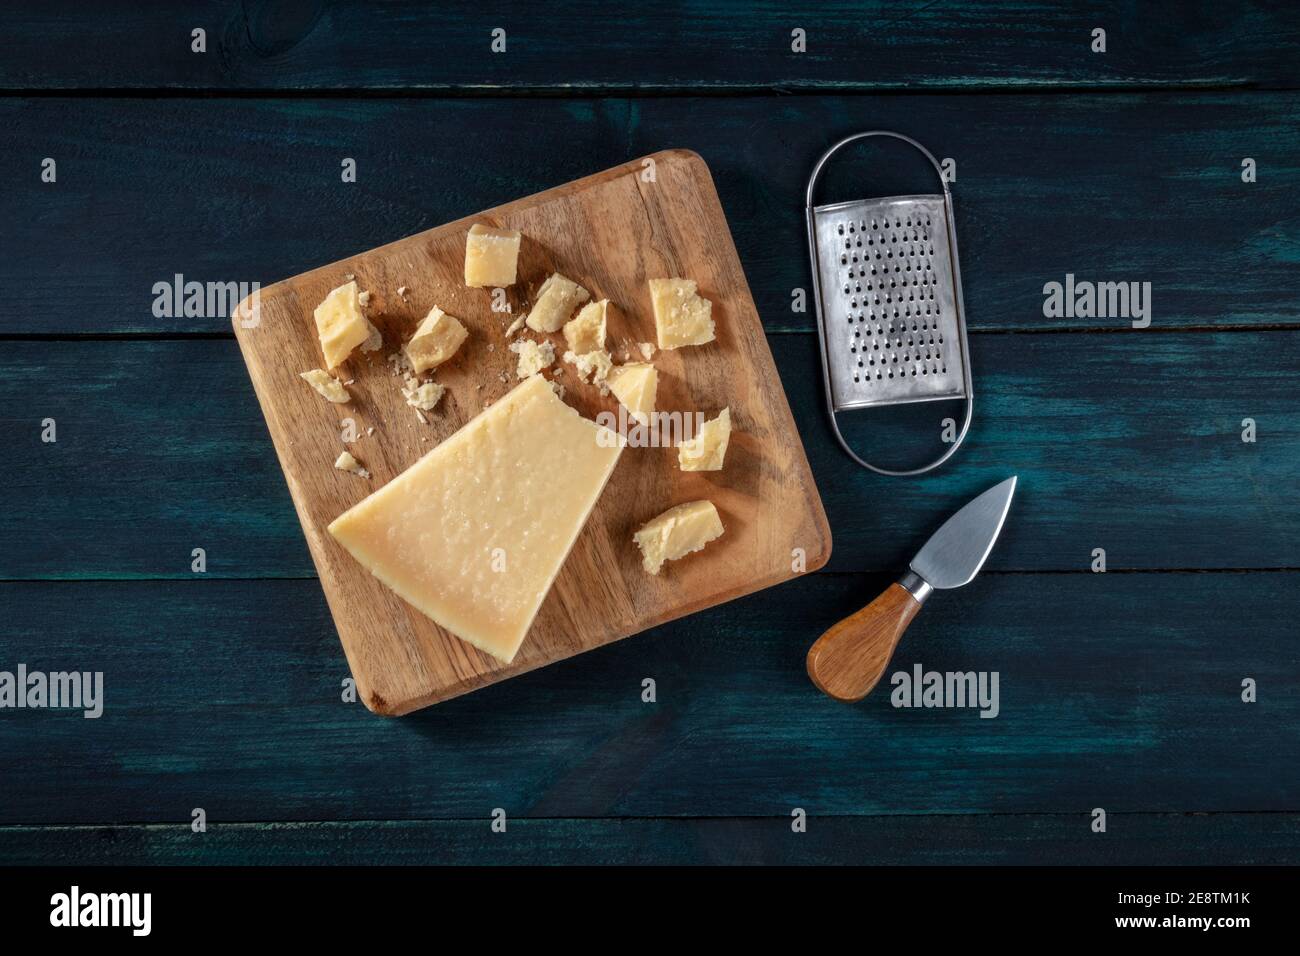 https://c8.alamy.com/comp/2E8TM1K/crumbled-parmesan-cheese-with-a-knife-and-a-grater-shot-from-above-on-a-dark-wooden-background-2E8TM1K.jpg